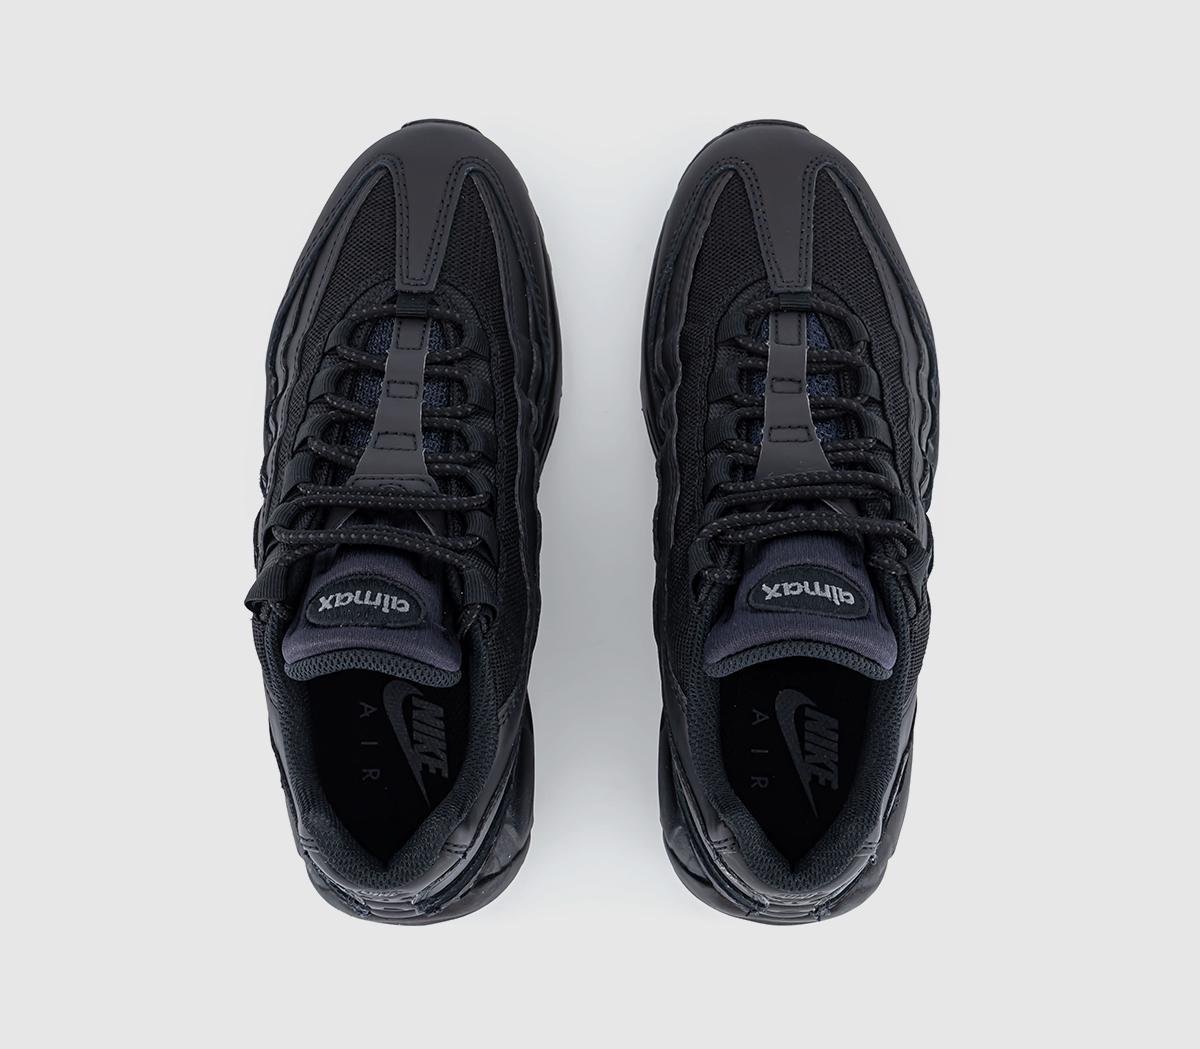 Nike Air Max 95 Trainers Black Black Anthracite - Unisex Sports